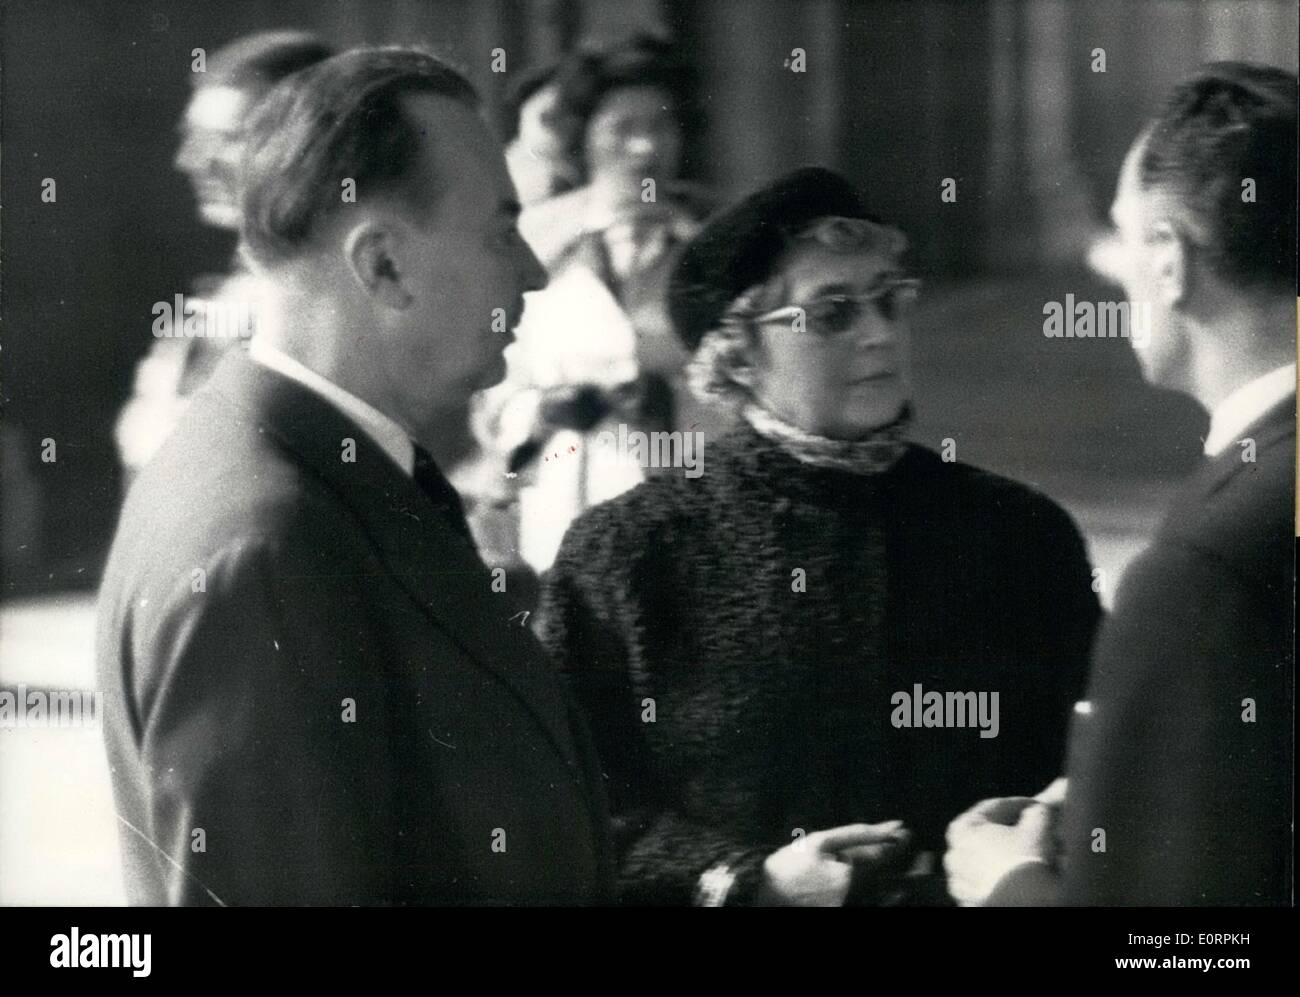 Mar. 03, 1960 - Biggest murder trial of the year opens in Paris :The trial of Georges Rapin, Alias M.Bill, opened in the Paris assizes today. Photo shows M.And Mme Rapin, the parents of the murderer arriving at the law courts. Stock Photo